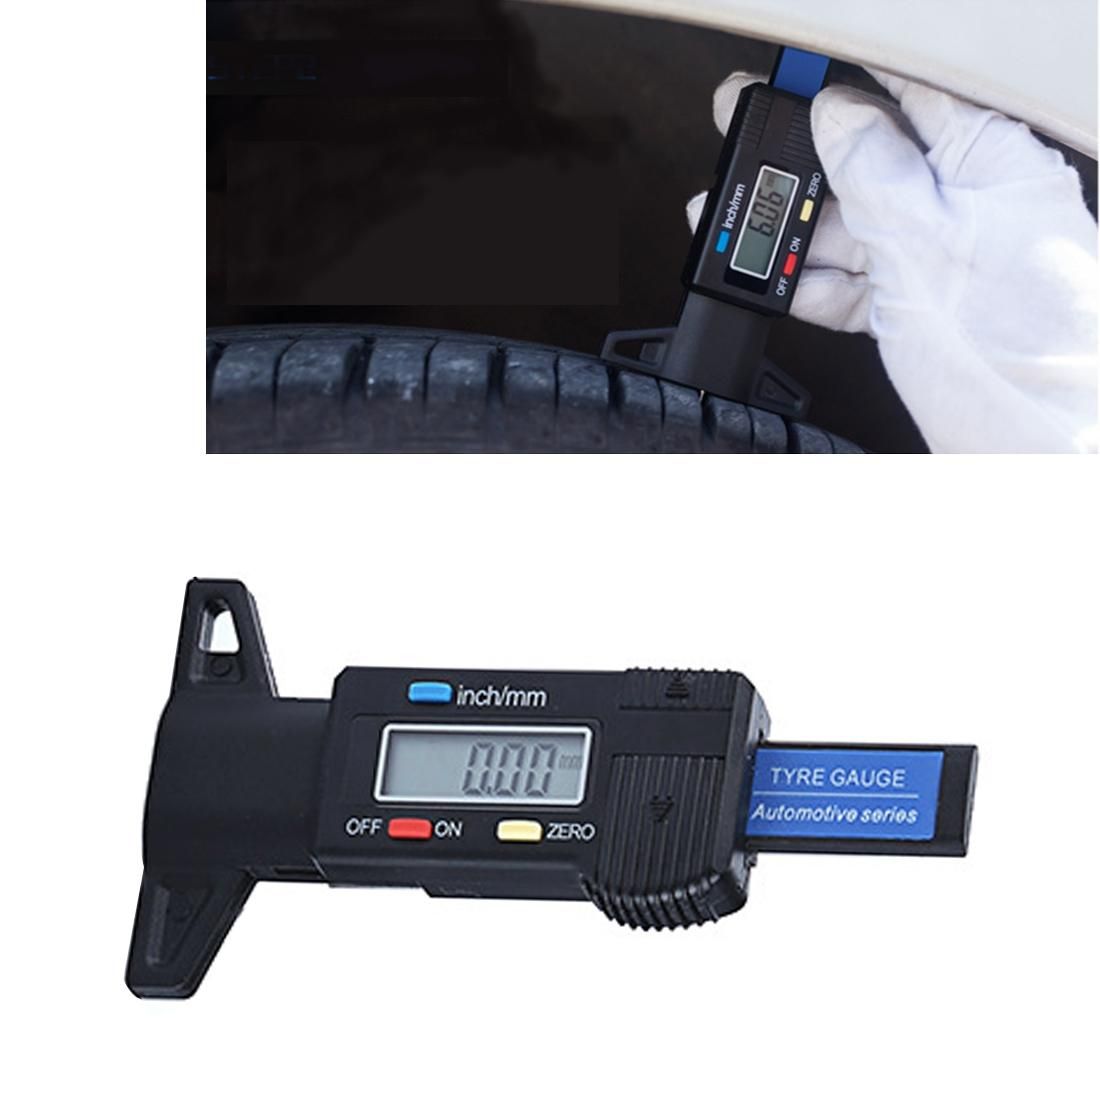 0-25mm Electronic Digital Tread Plan Refinding Rounds Refinding Outcome Exists Tread Tablets Type Gauge Depth Vernier Caliper Measuring Tools (Black)